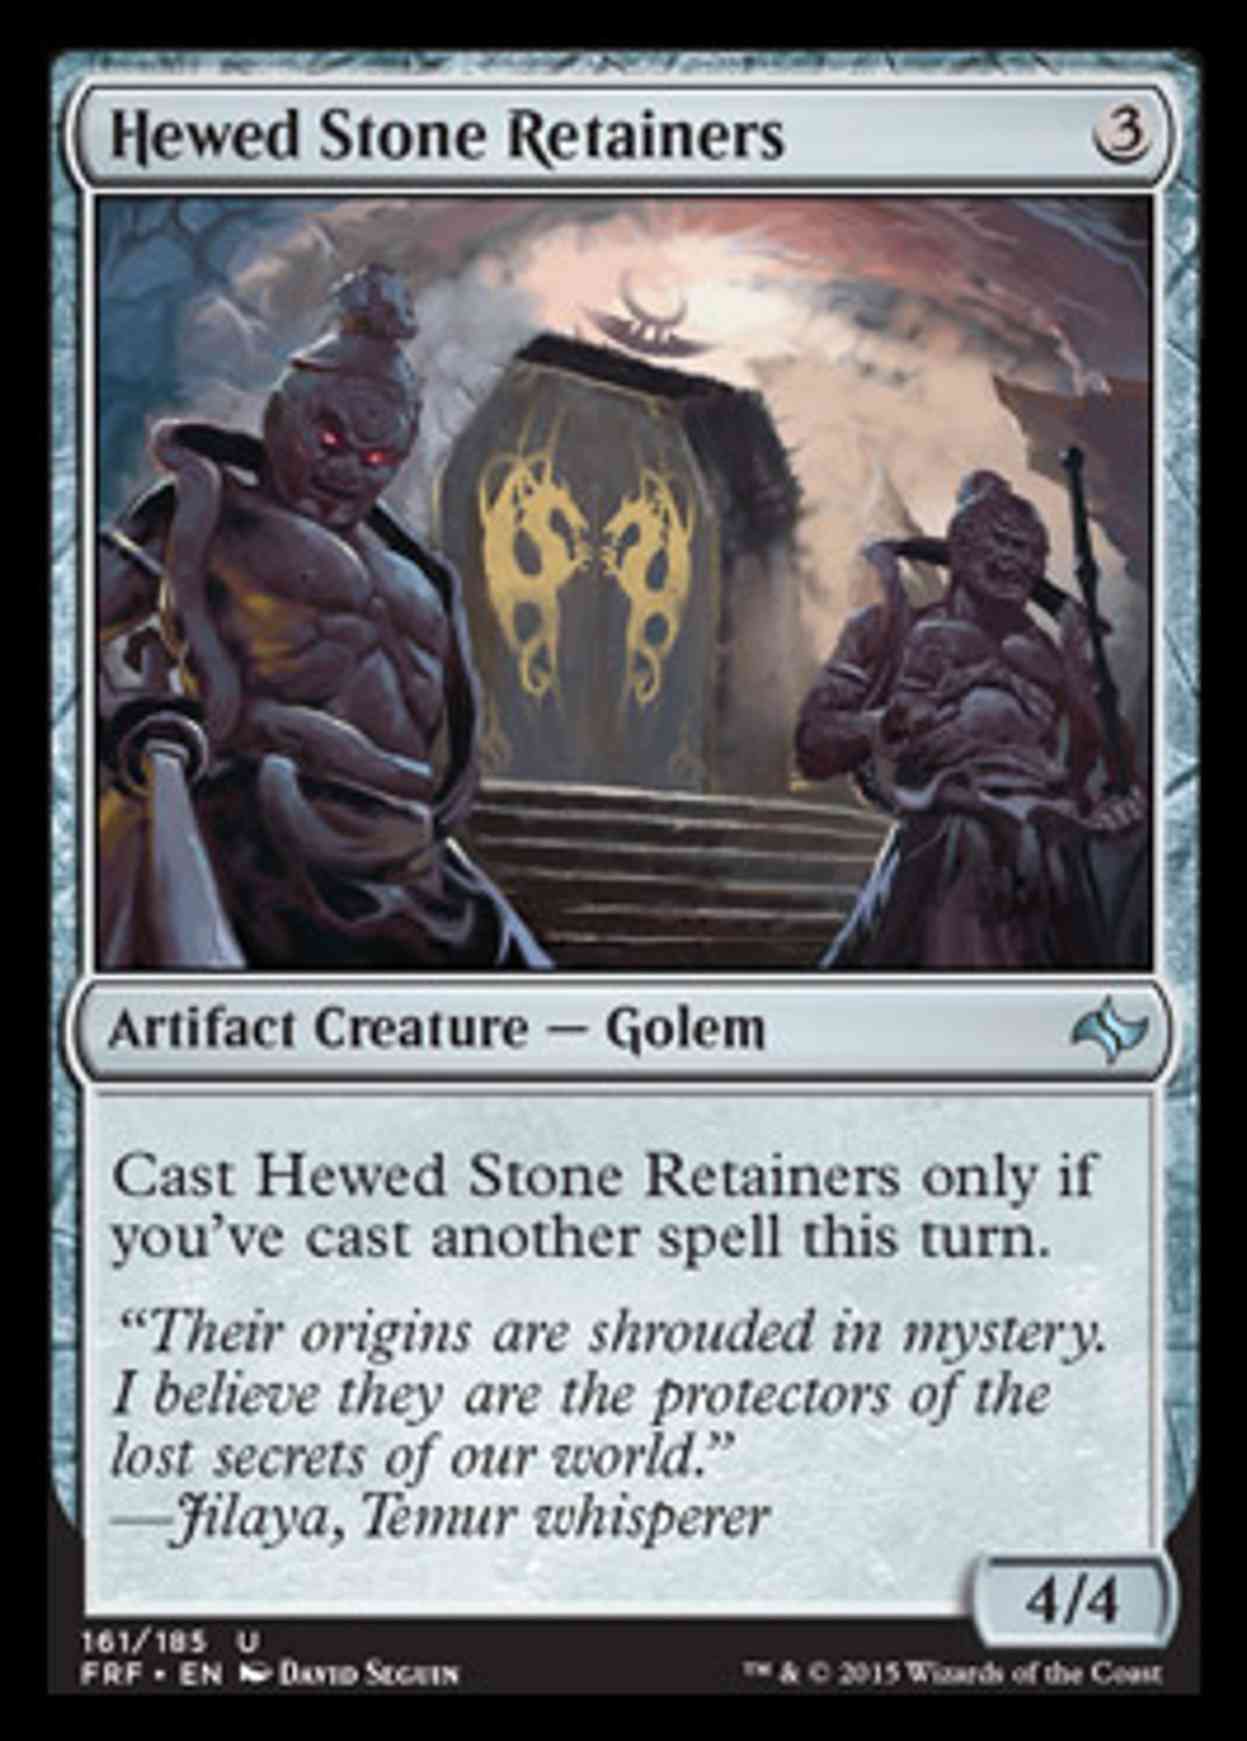 Hewed Stone Retainers magic card front